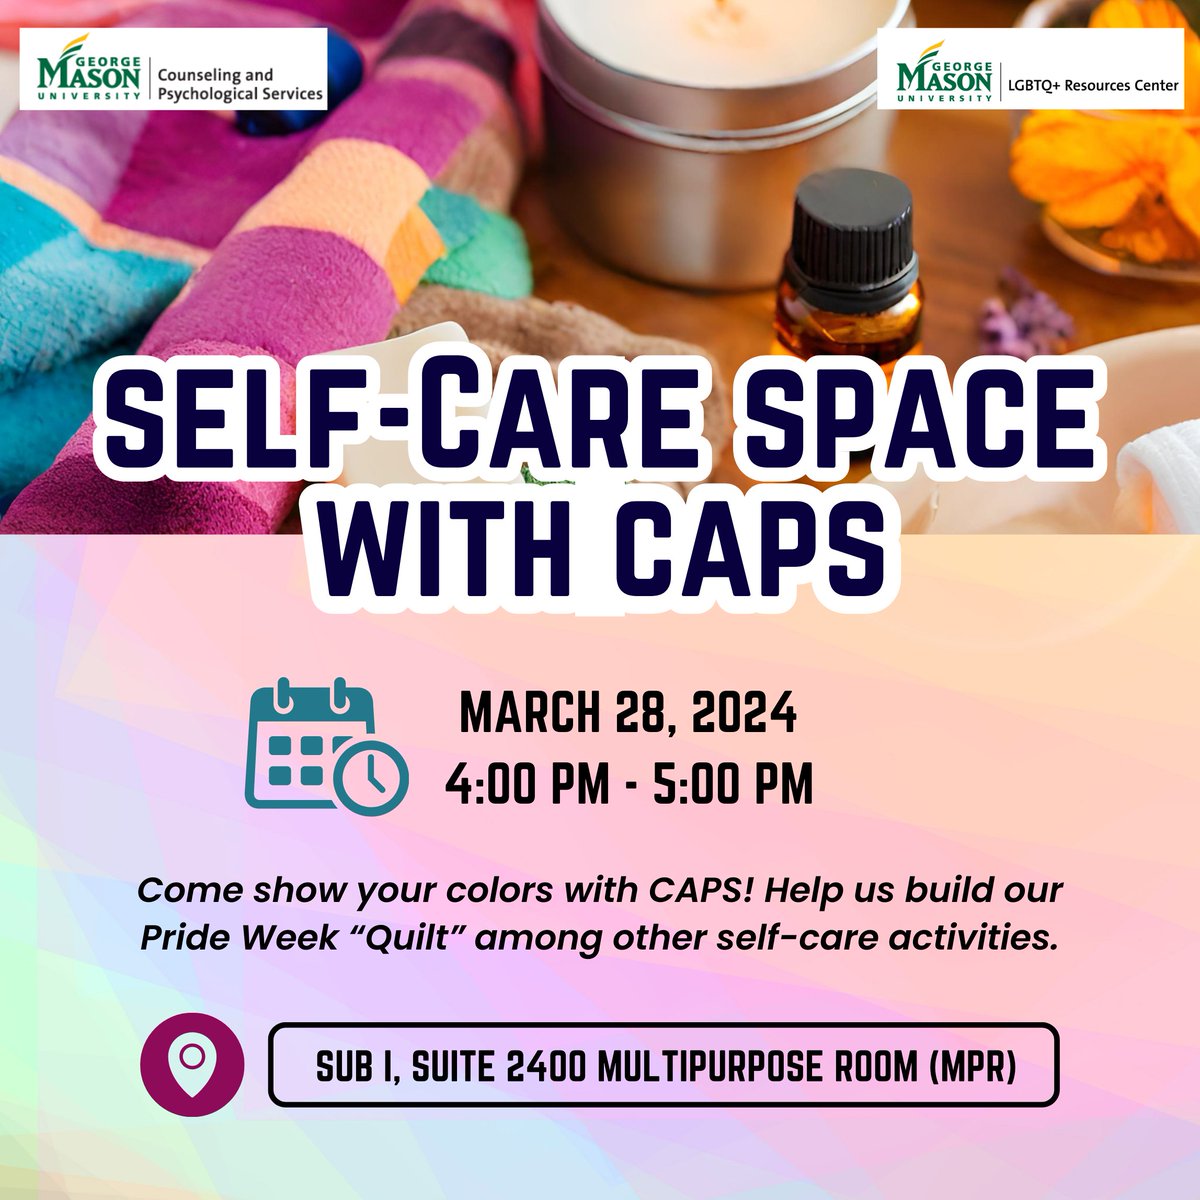 Embracing our true selves while stitching together in a safe space of creativity and self-care 🌈✨ Join us to unwind, destress, and celebrate our vibrant community❤️